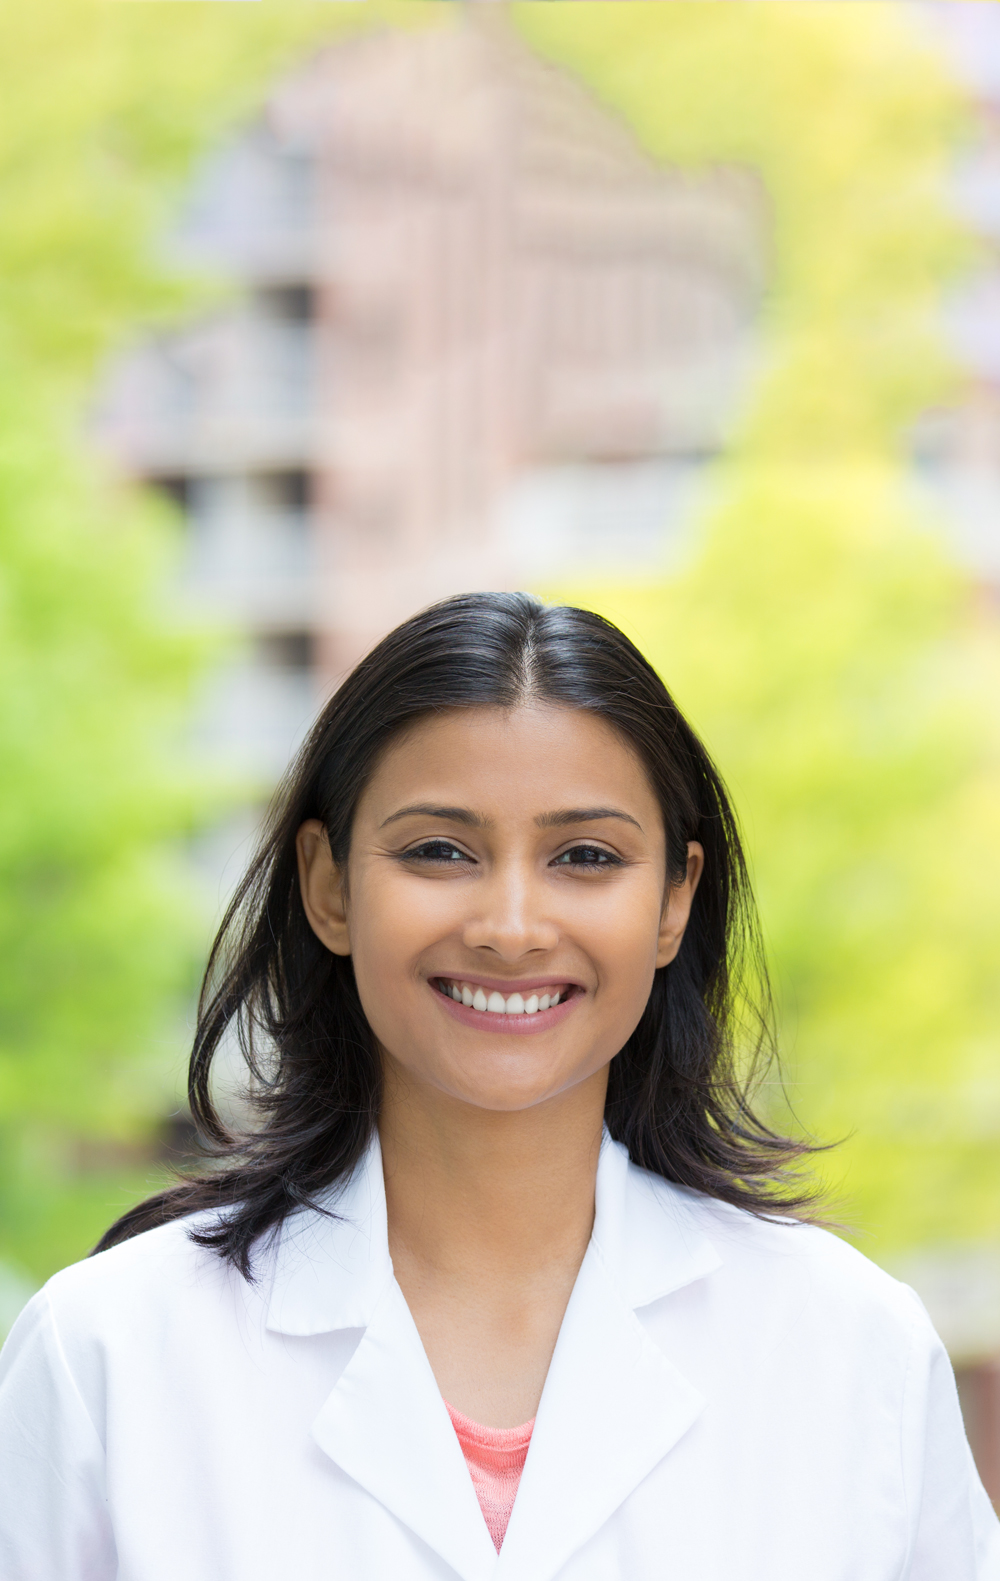 Closeup portrait of confident, smiling female health care professional in white lab coat, isolated background of blurred trees and buildings